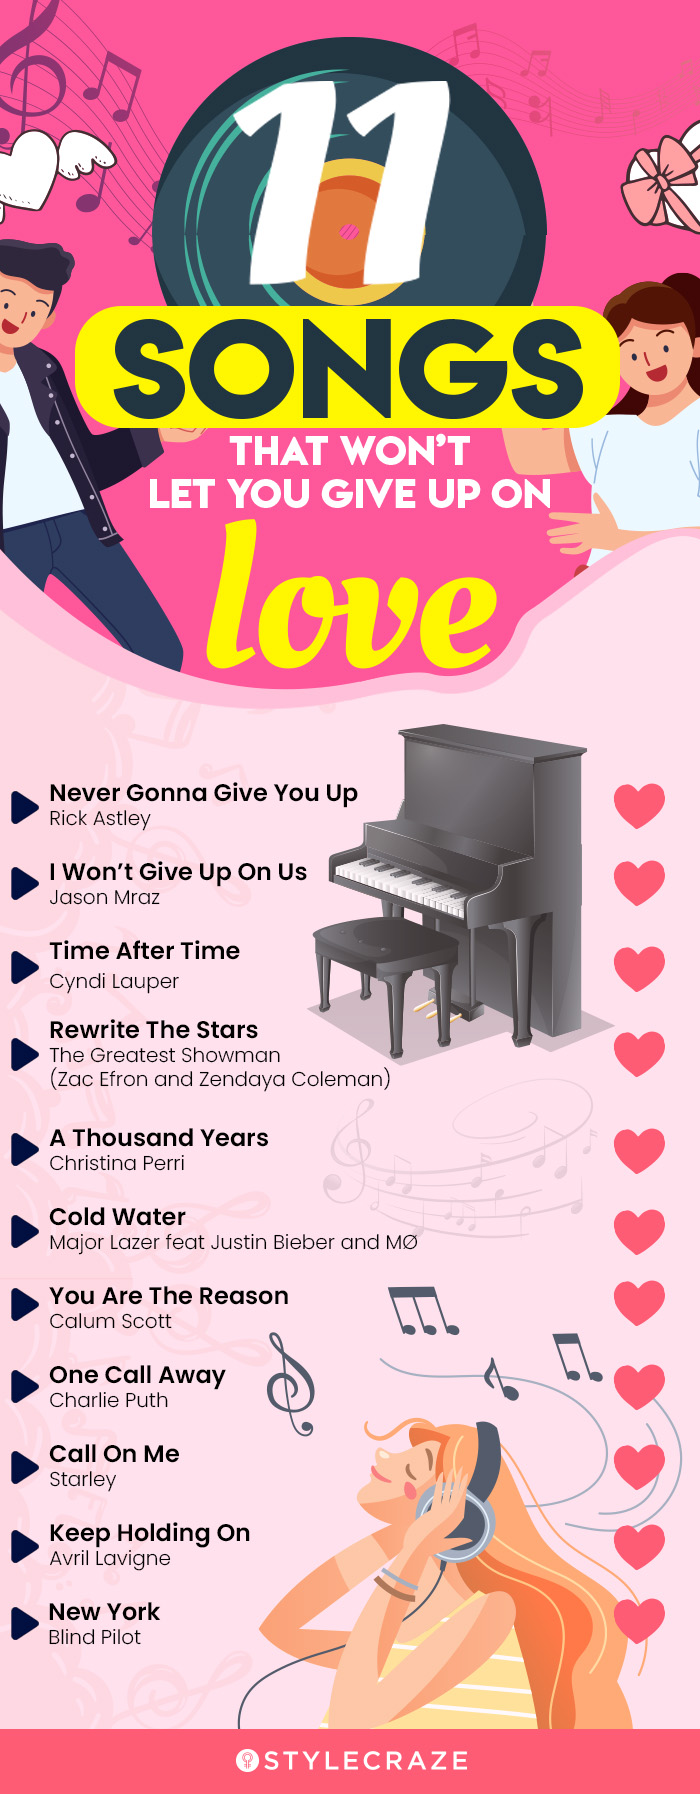 11 songs that won't let you give up on love (infographic)